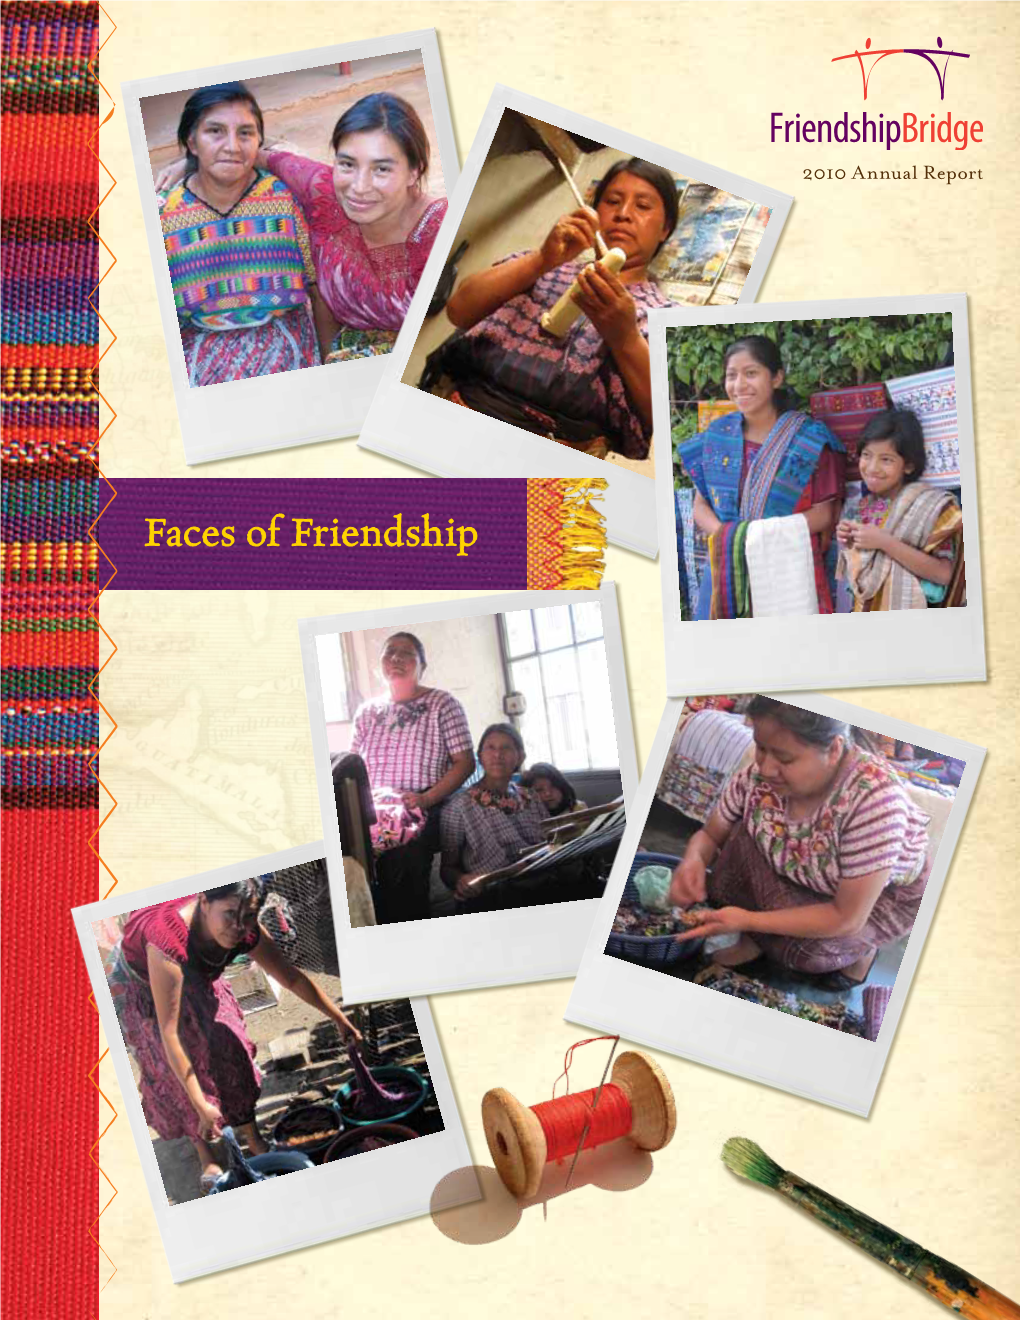 Faces of Friendship Message from the Executive Director and Board President